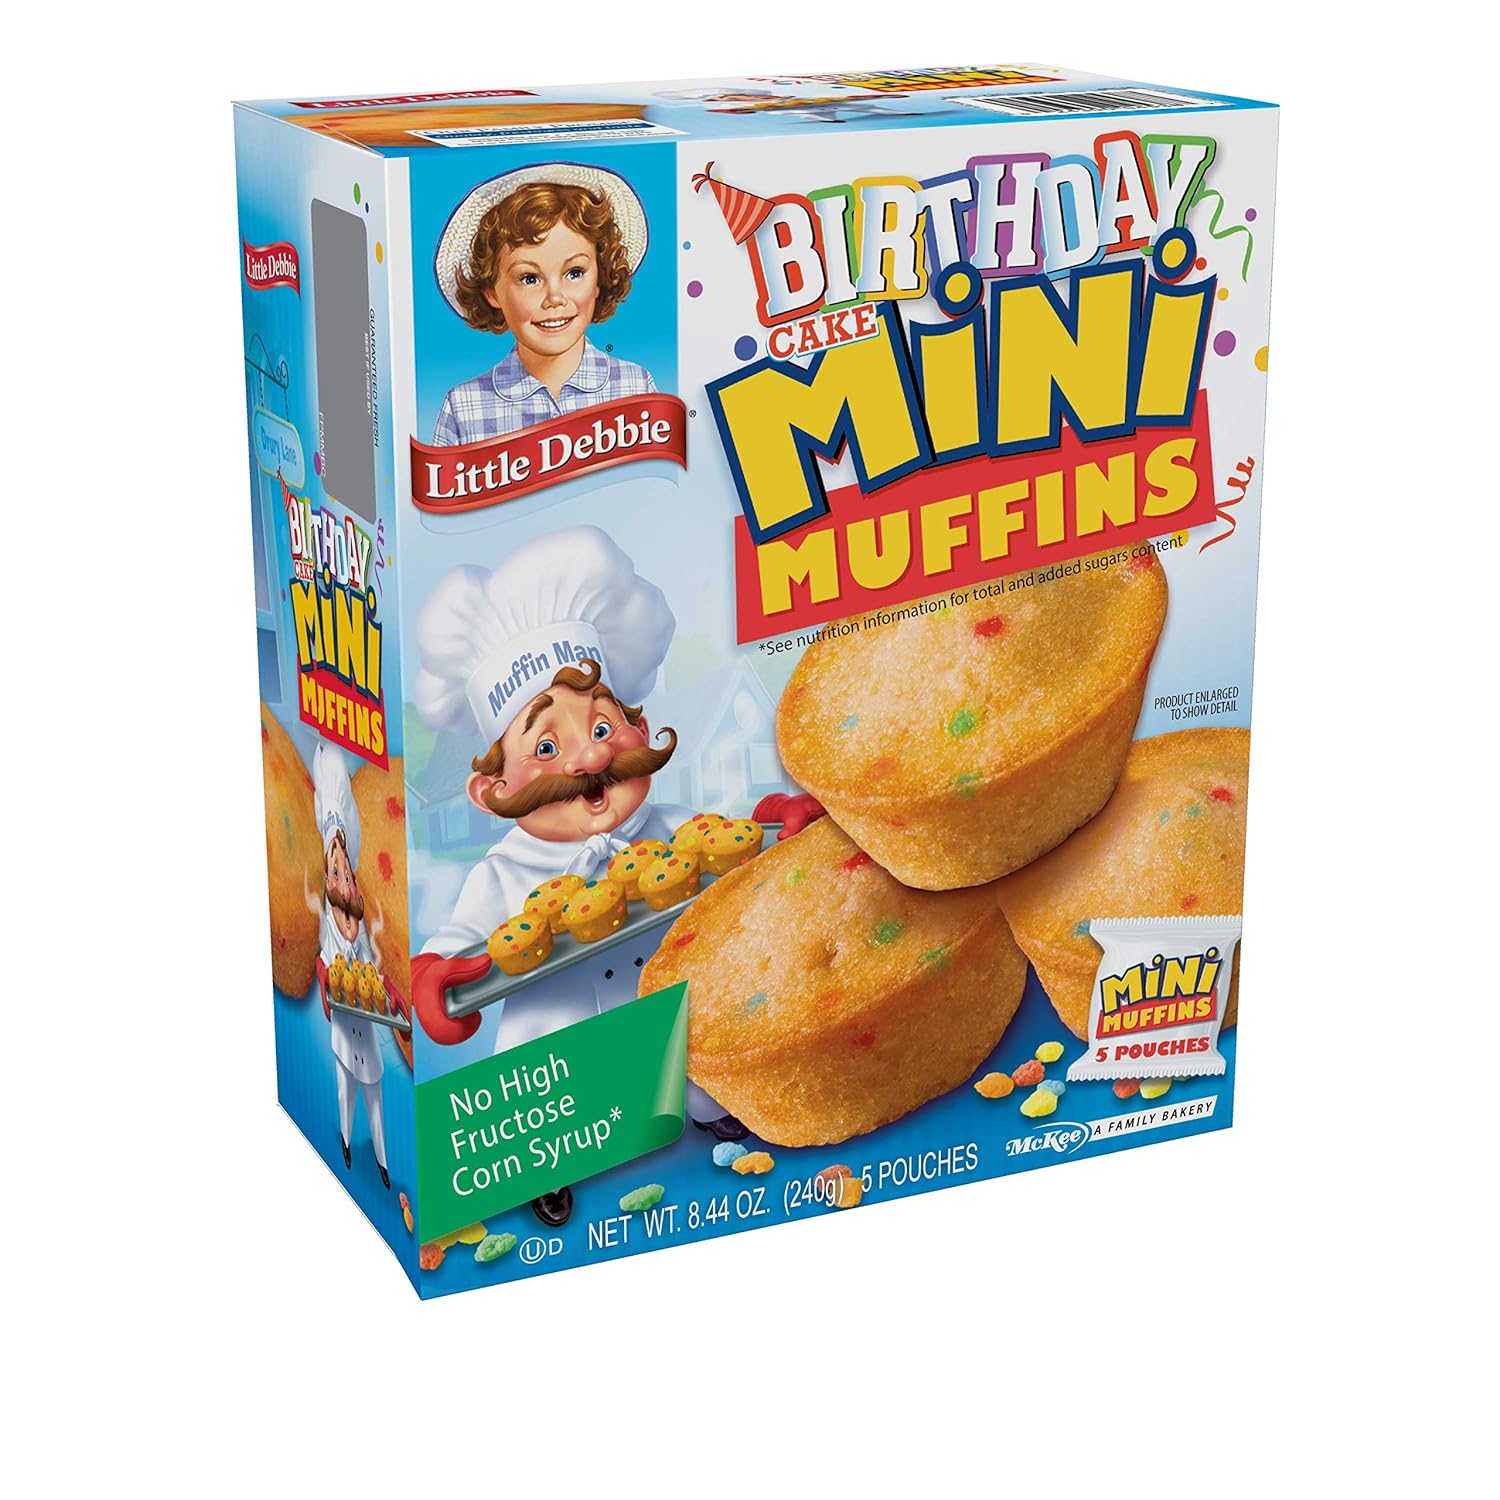 Little Debbie Birthday Cake Mini Muffins, 40-1.7 OZ Pouches (8 Boxes) : Grocery & Gourmet Food